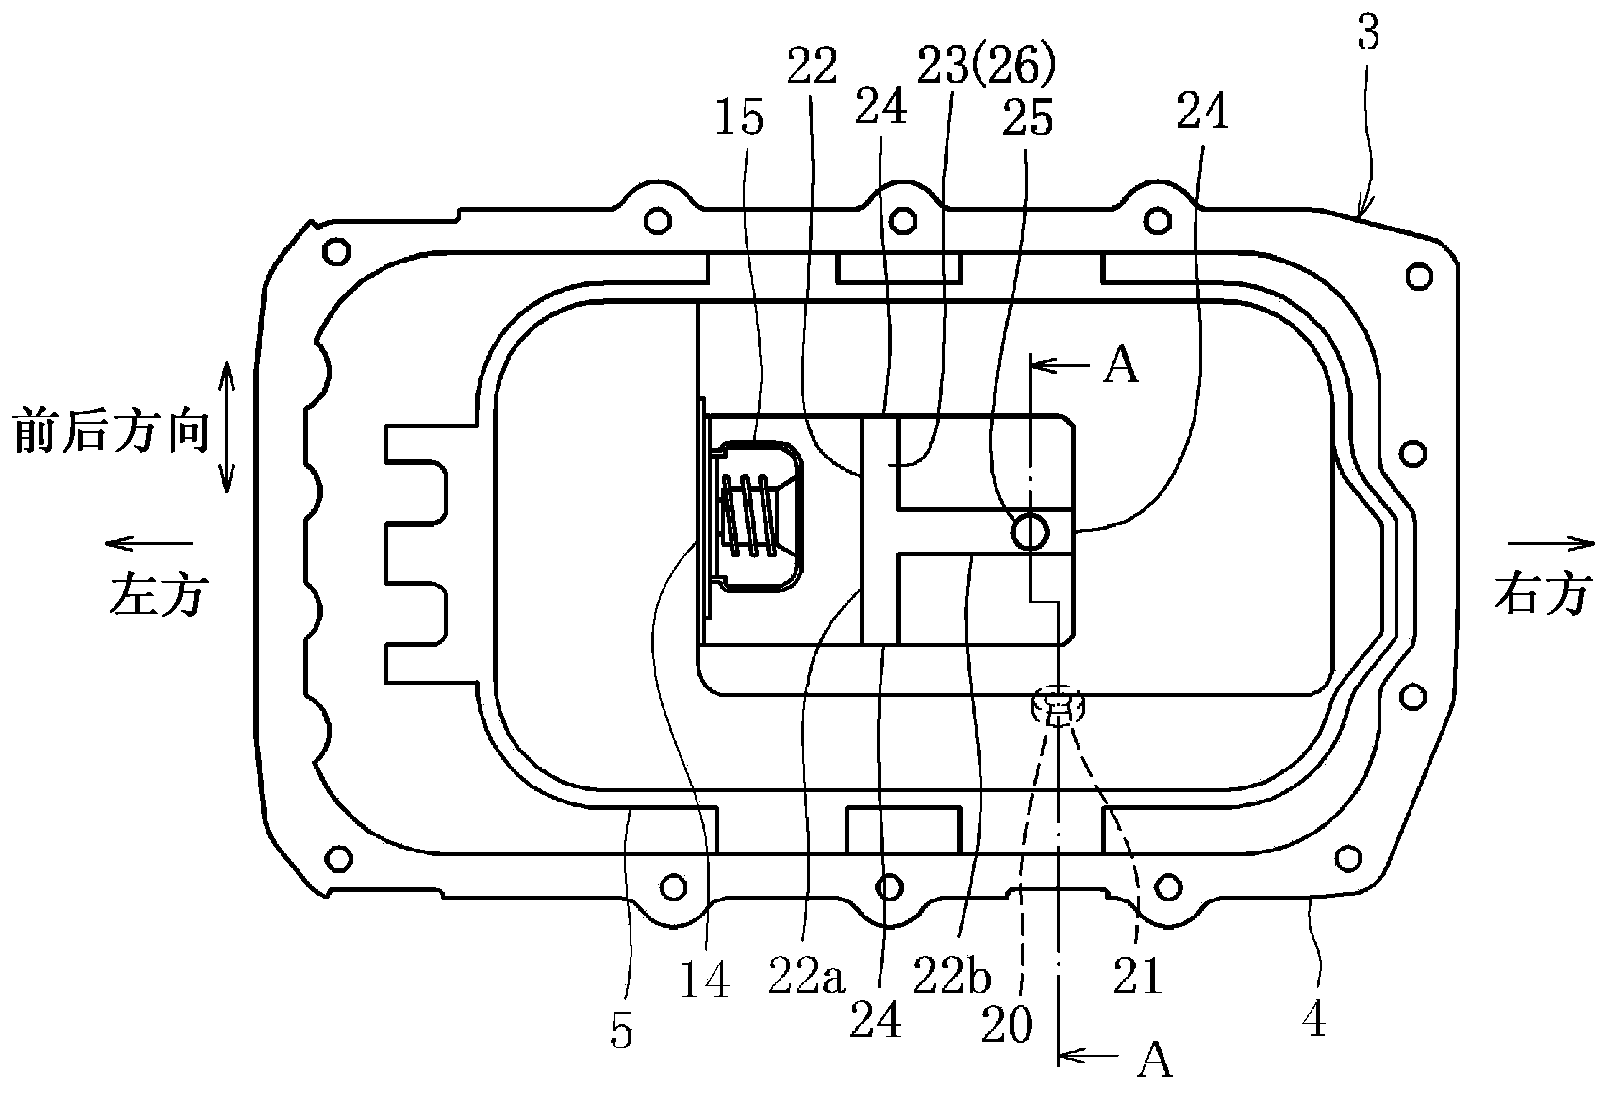 Oil pan structure of engine